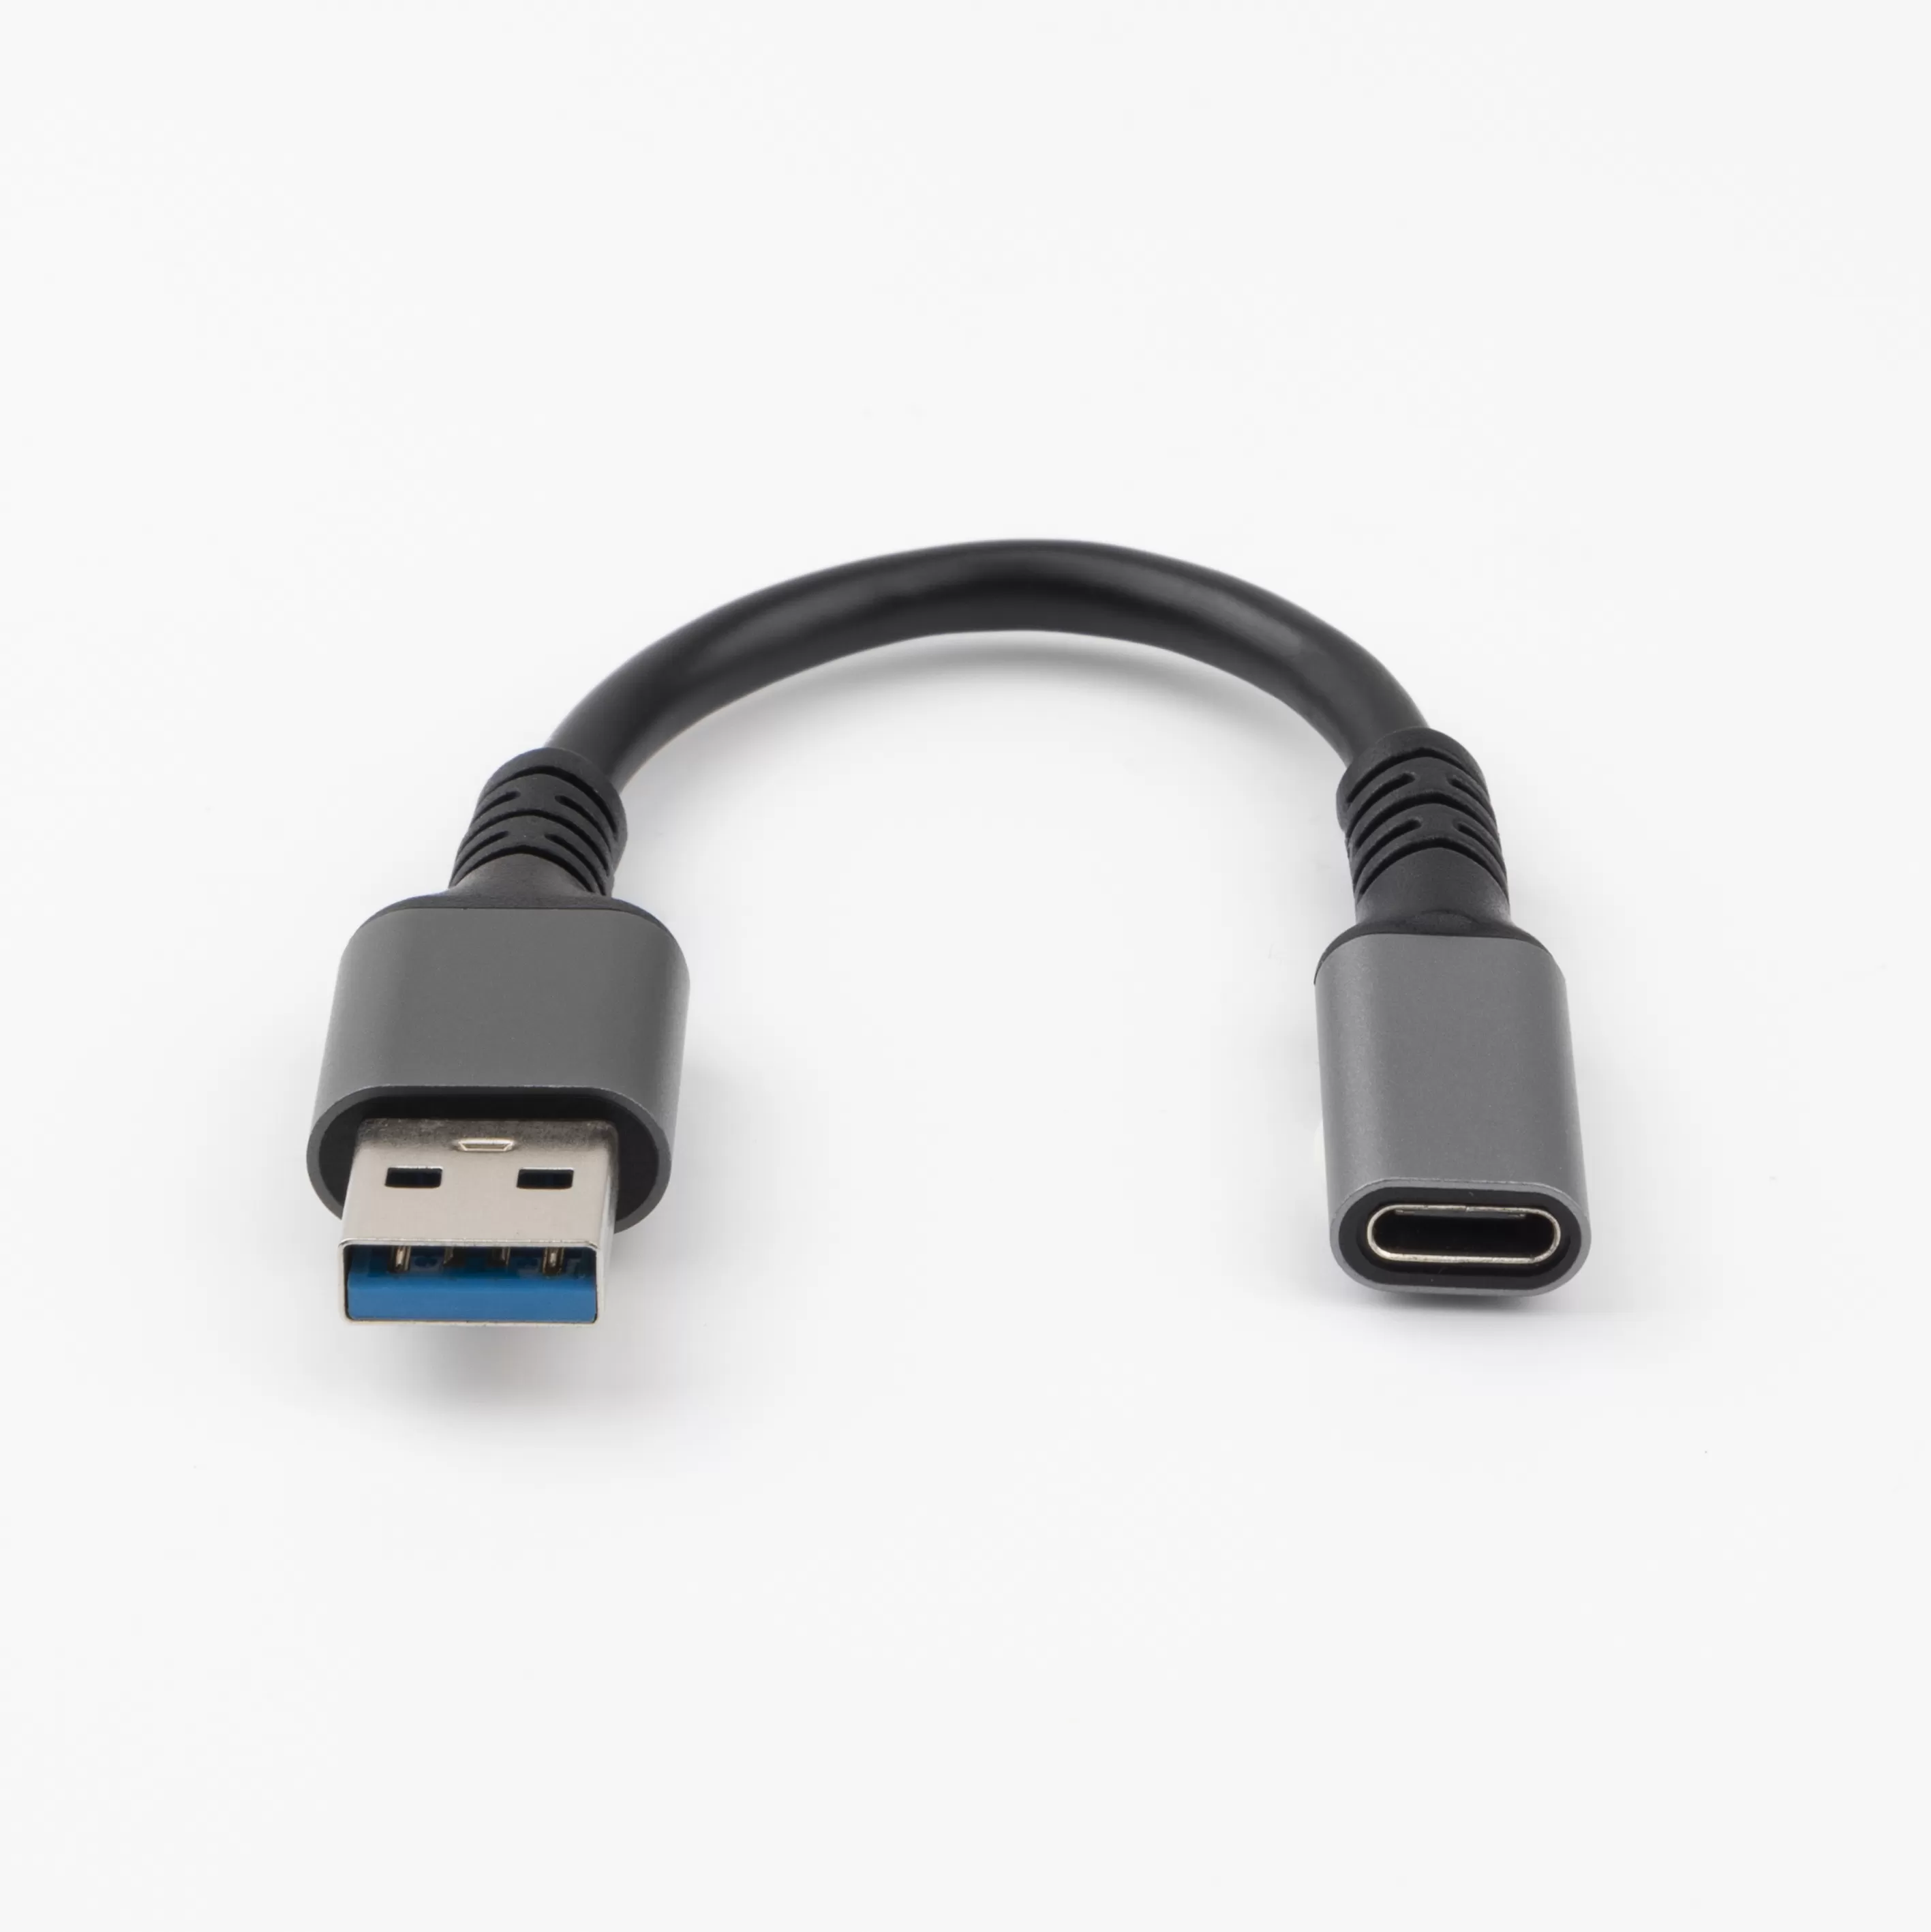 USB A Male to USB C Female 10G USB3.1 Gen2 Cable